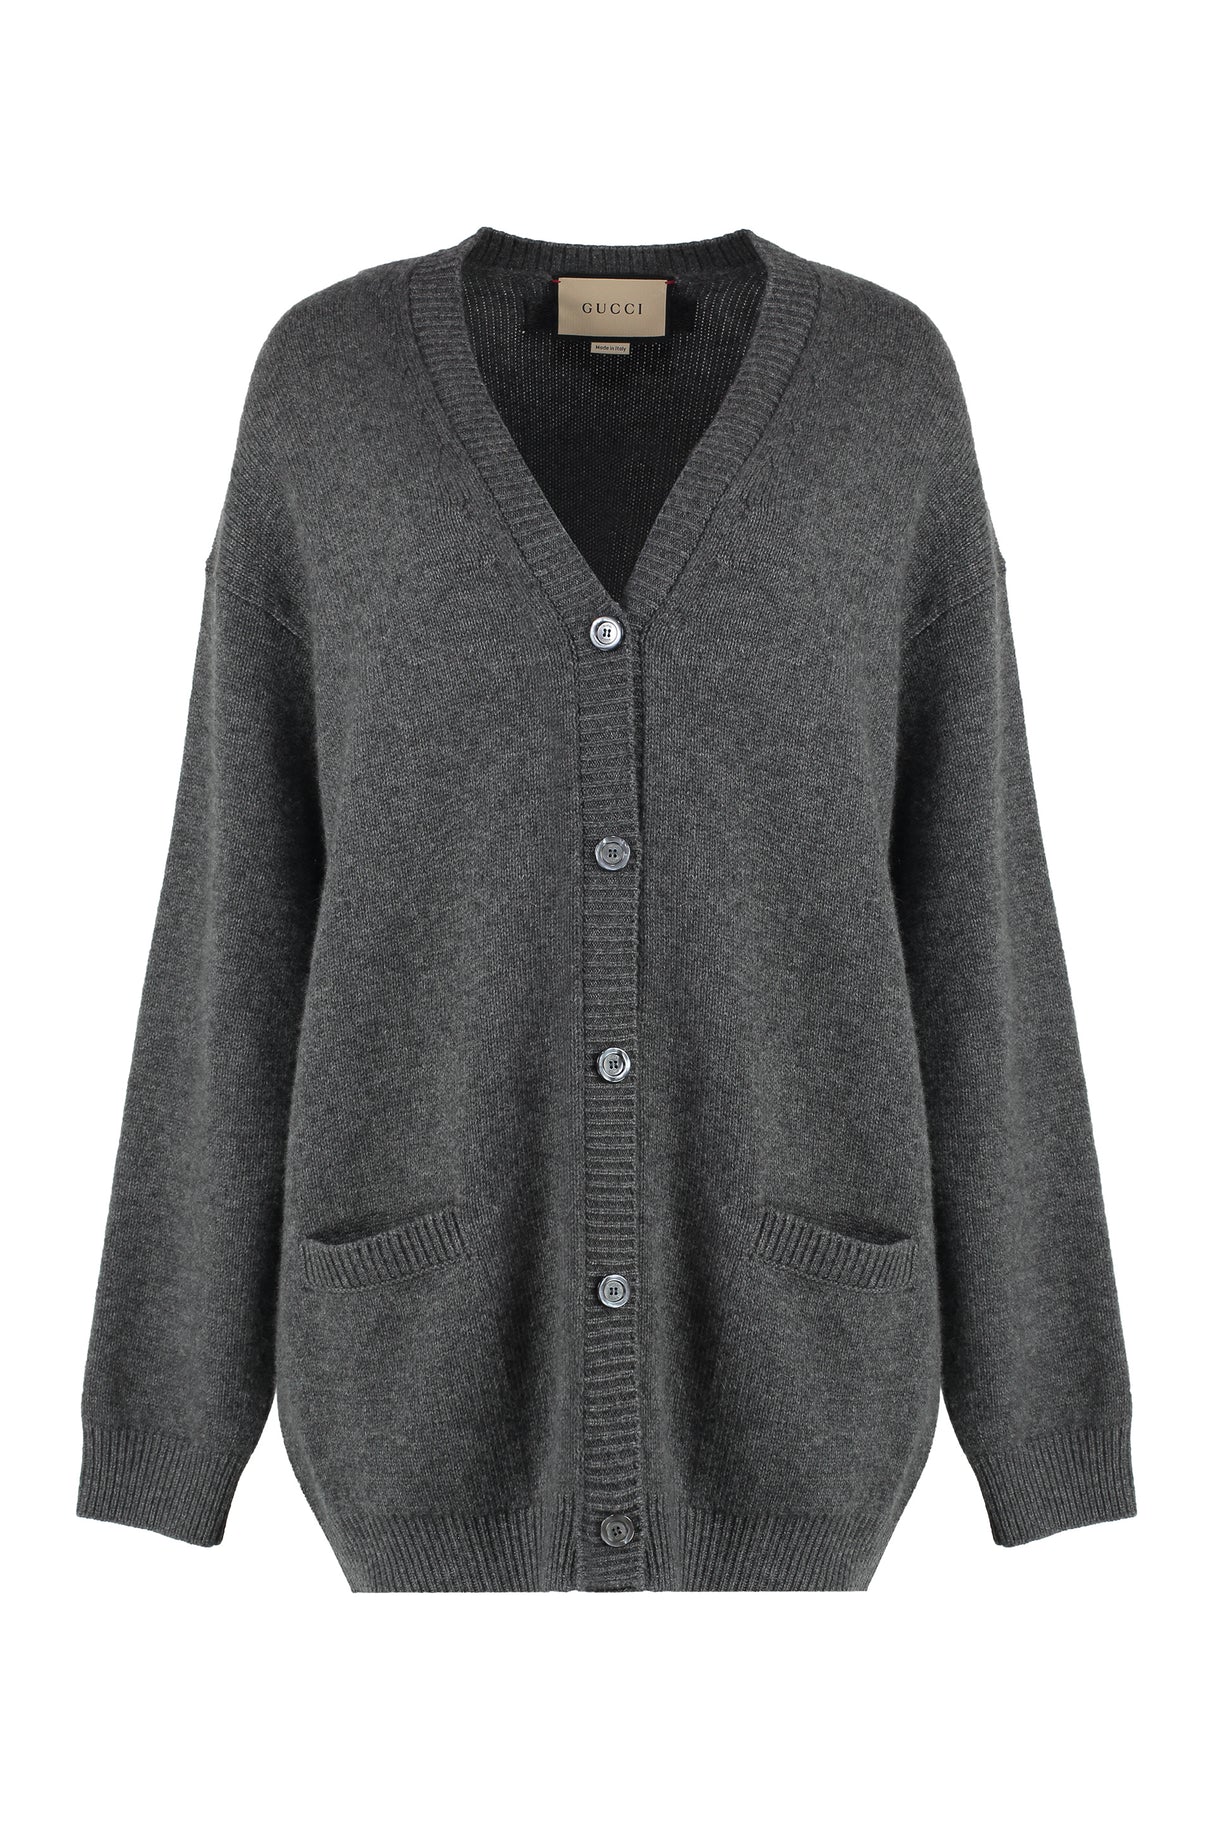 GUCCI Luxurious Cashmere Cardigan for Women - Soft and Cozy, Perfect for SS24